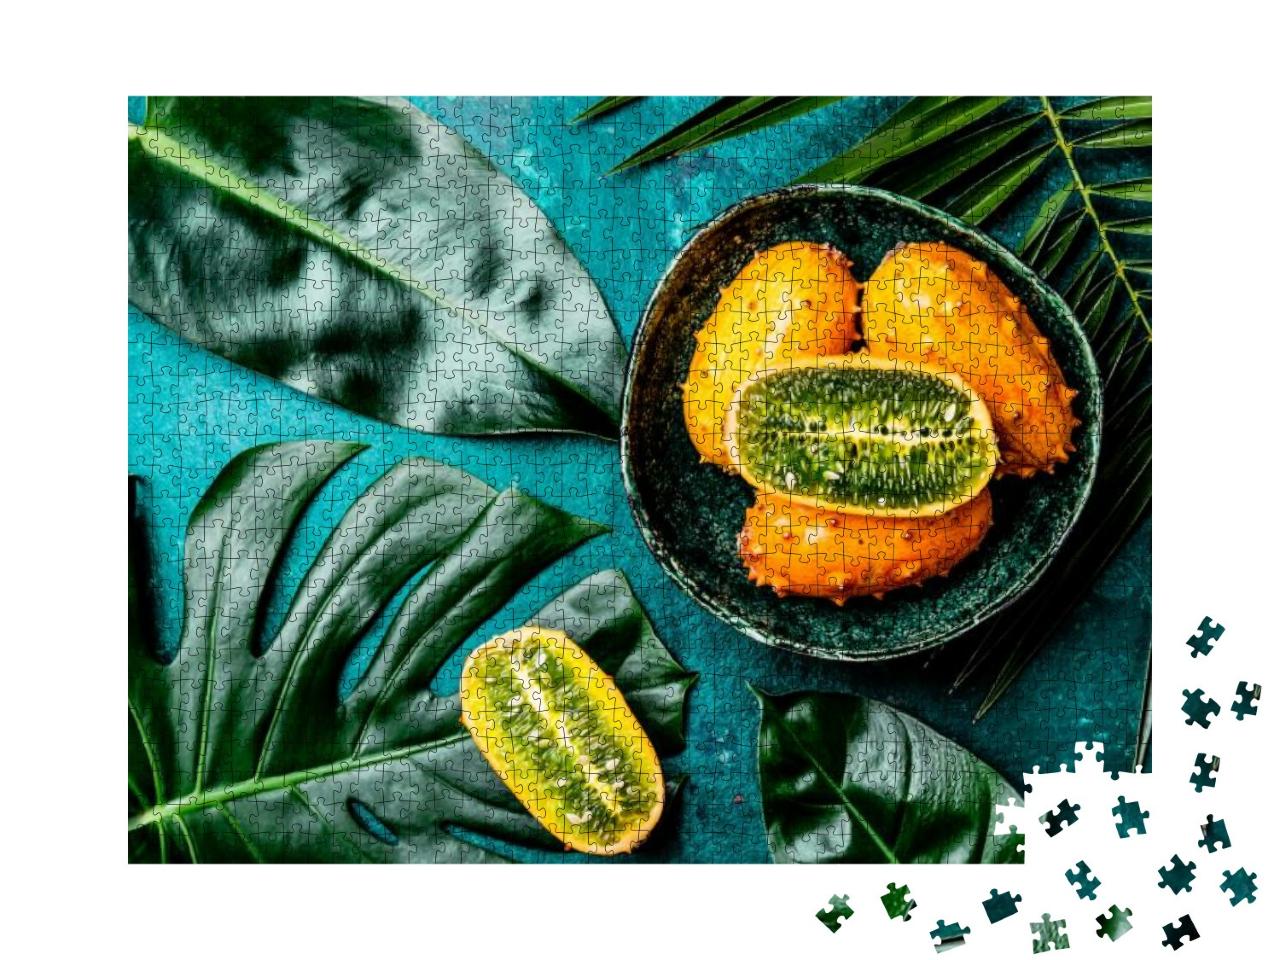 Tropical Fruit Kiwano Passion Fruit in Green Bowl on Turq... Jigsaw Puzzle with 1000 pieces